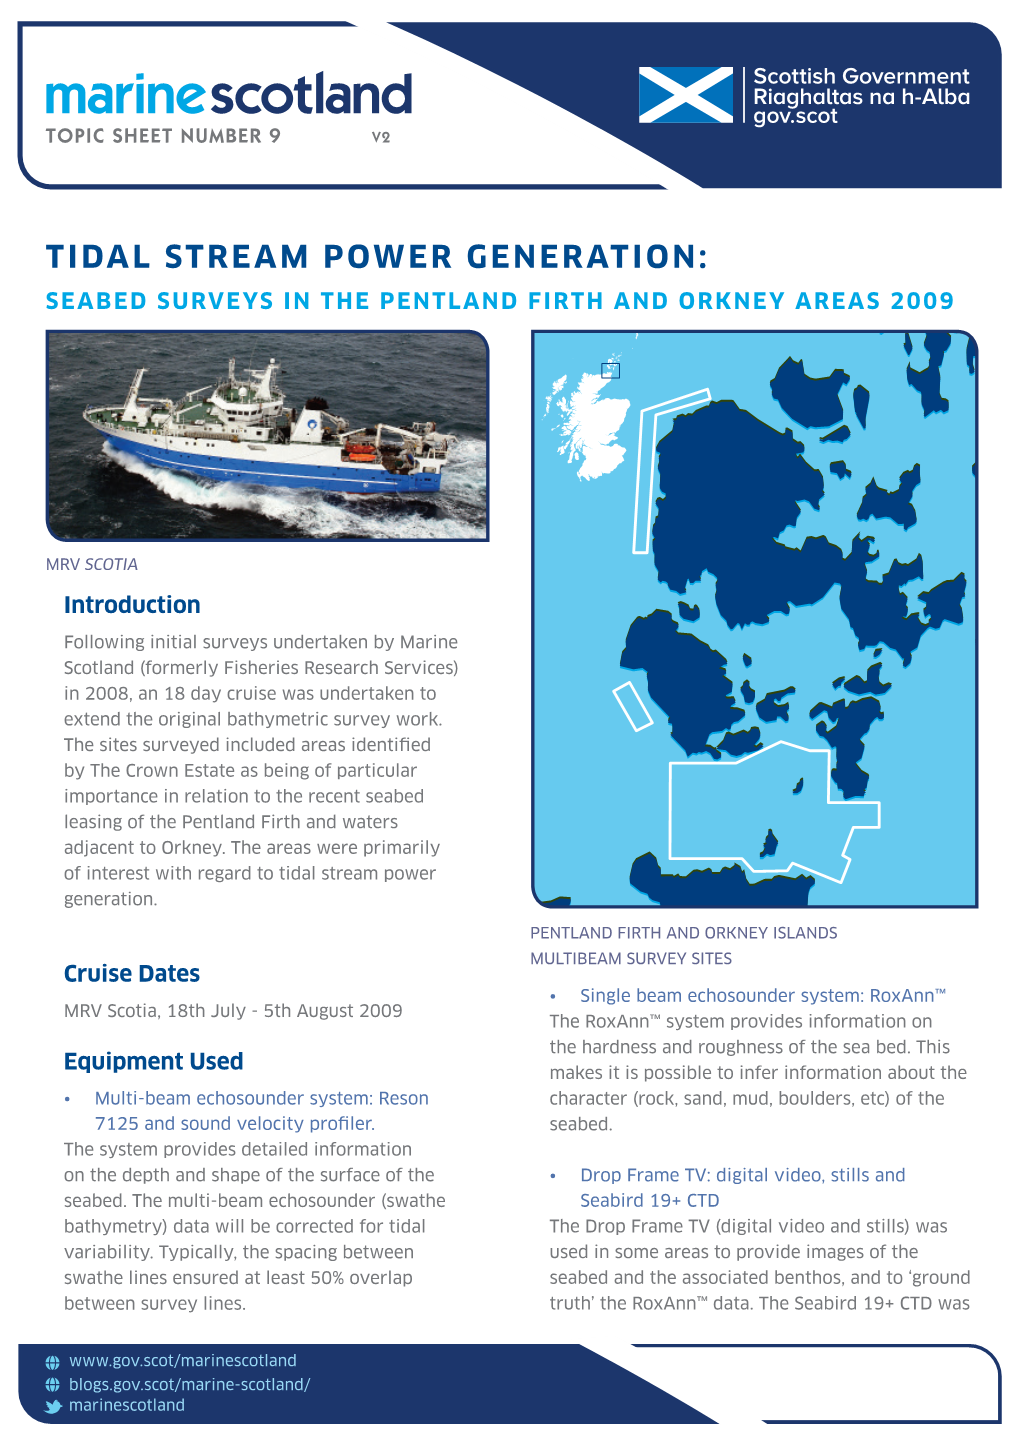 Tidal Stream Power Generation: Seabed Surveys in the Pentland Firth and Orkney Areas 2009